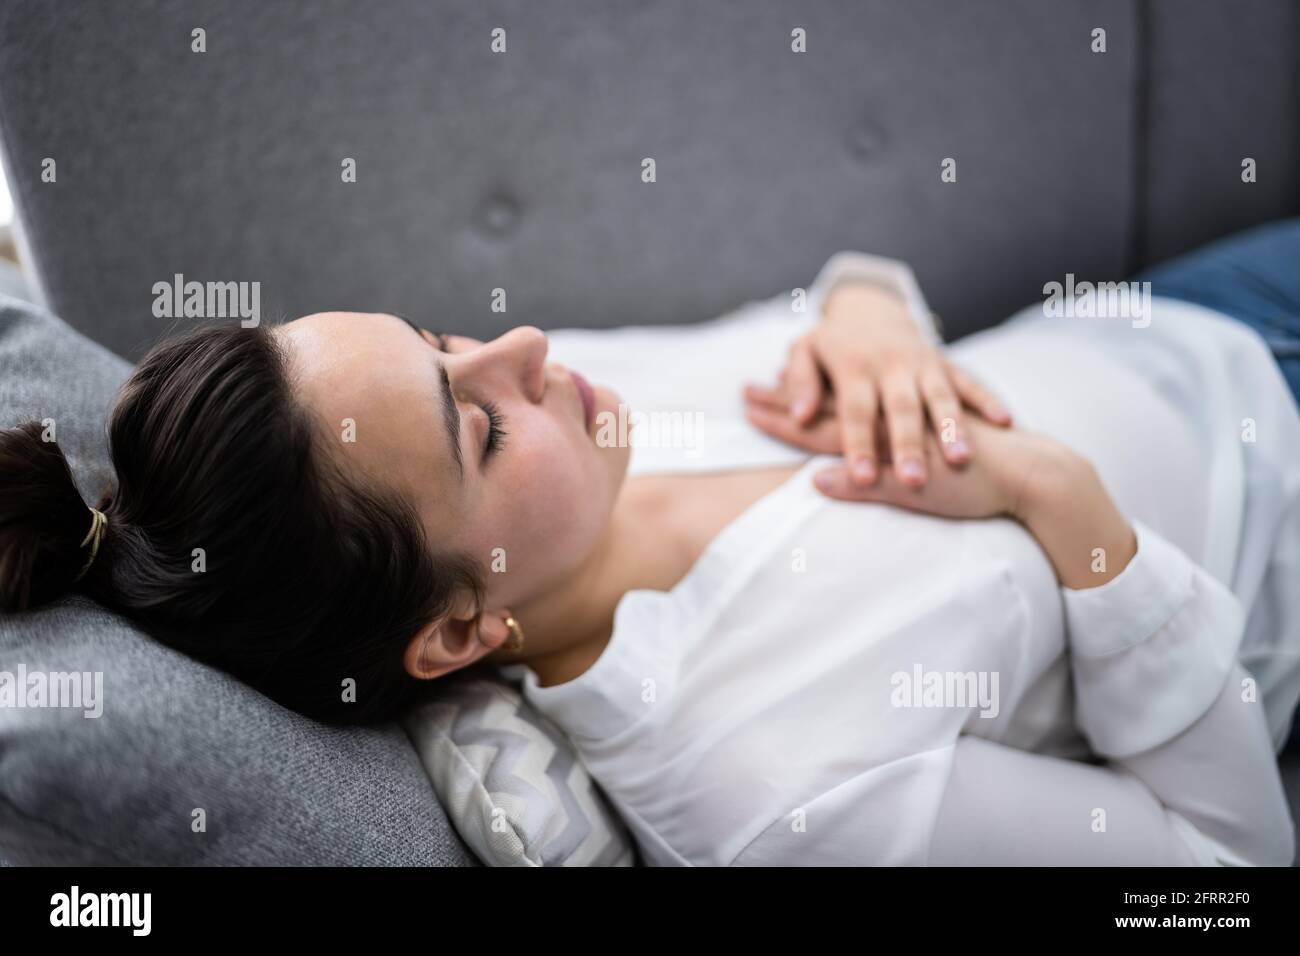 Psychic Hand Healing Energy Light And Reiki Therapy Stock Photo